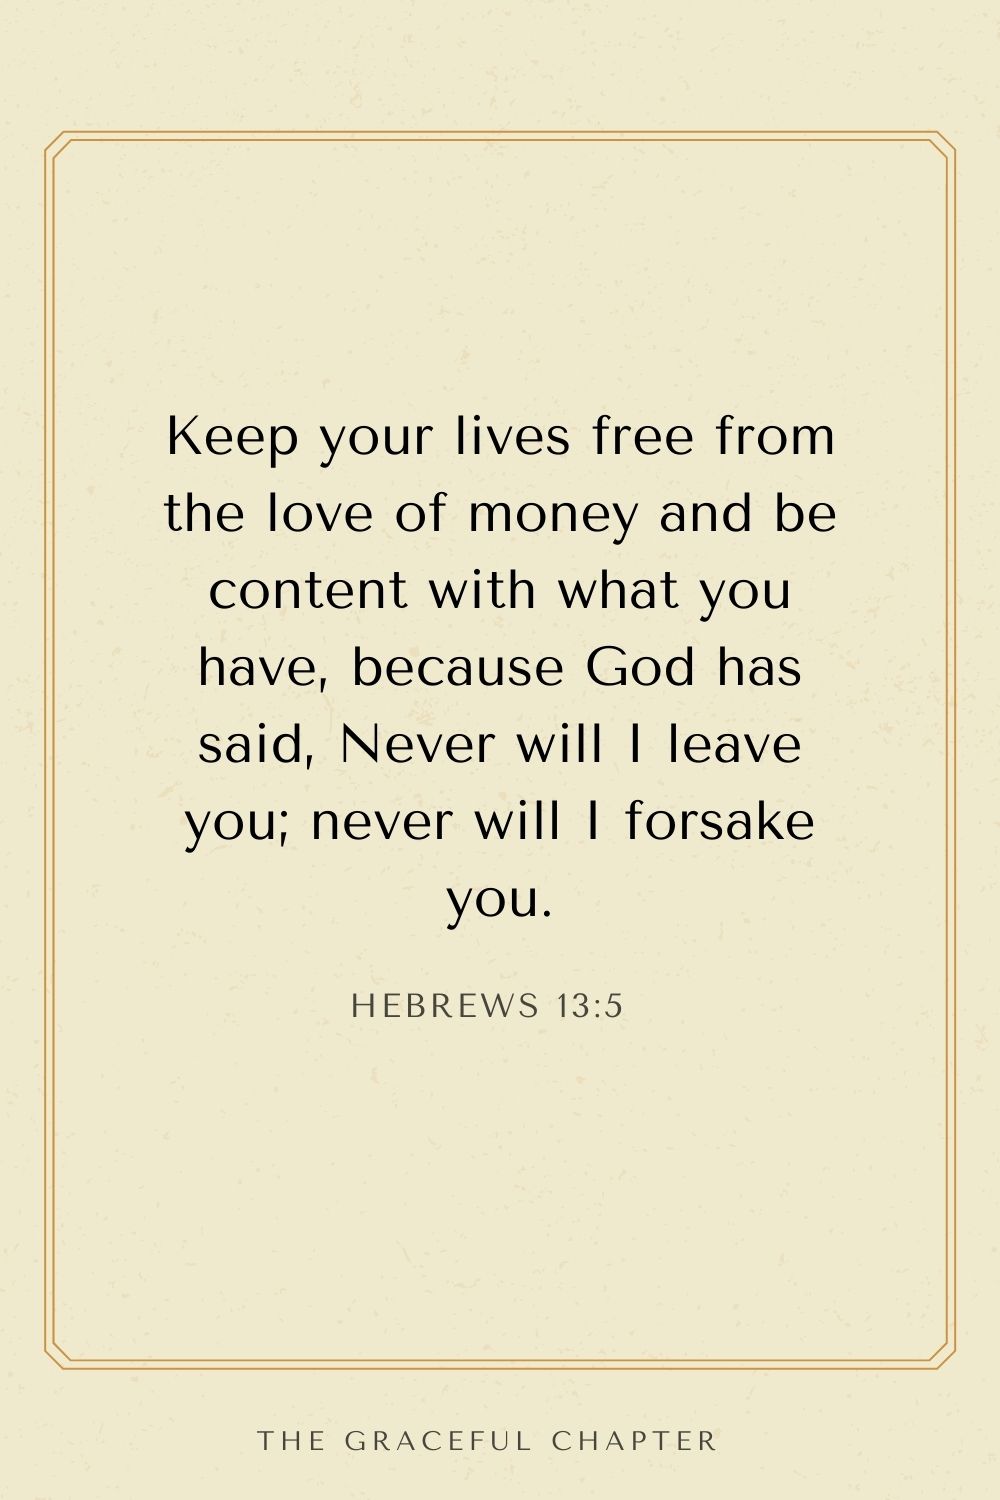 Keep your lives free from the love of money and be content with what you have, because God has said, Never will I leave you; never will I forsake you. Hebrews 13:5